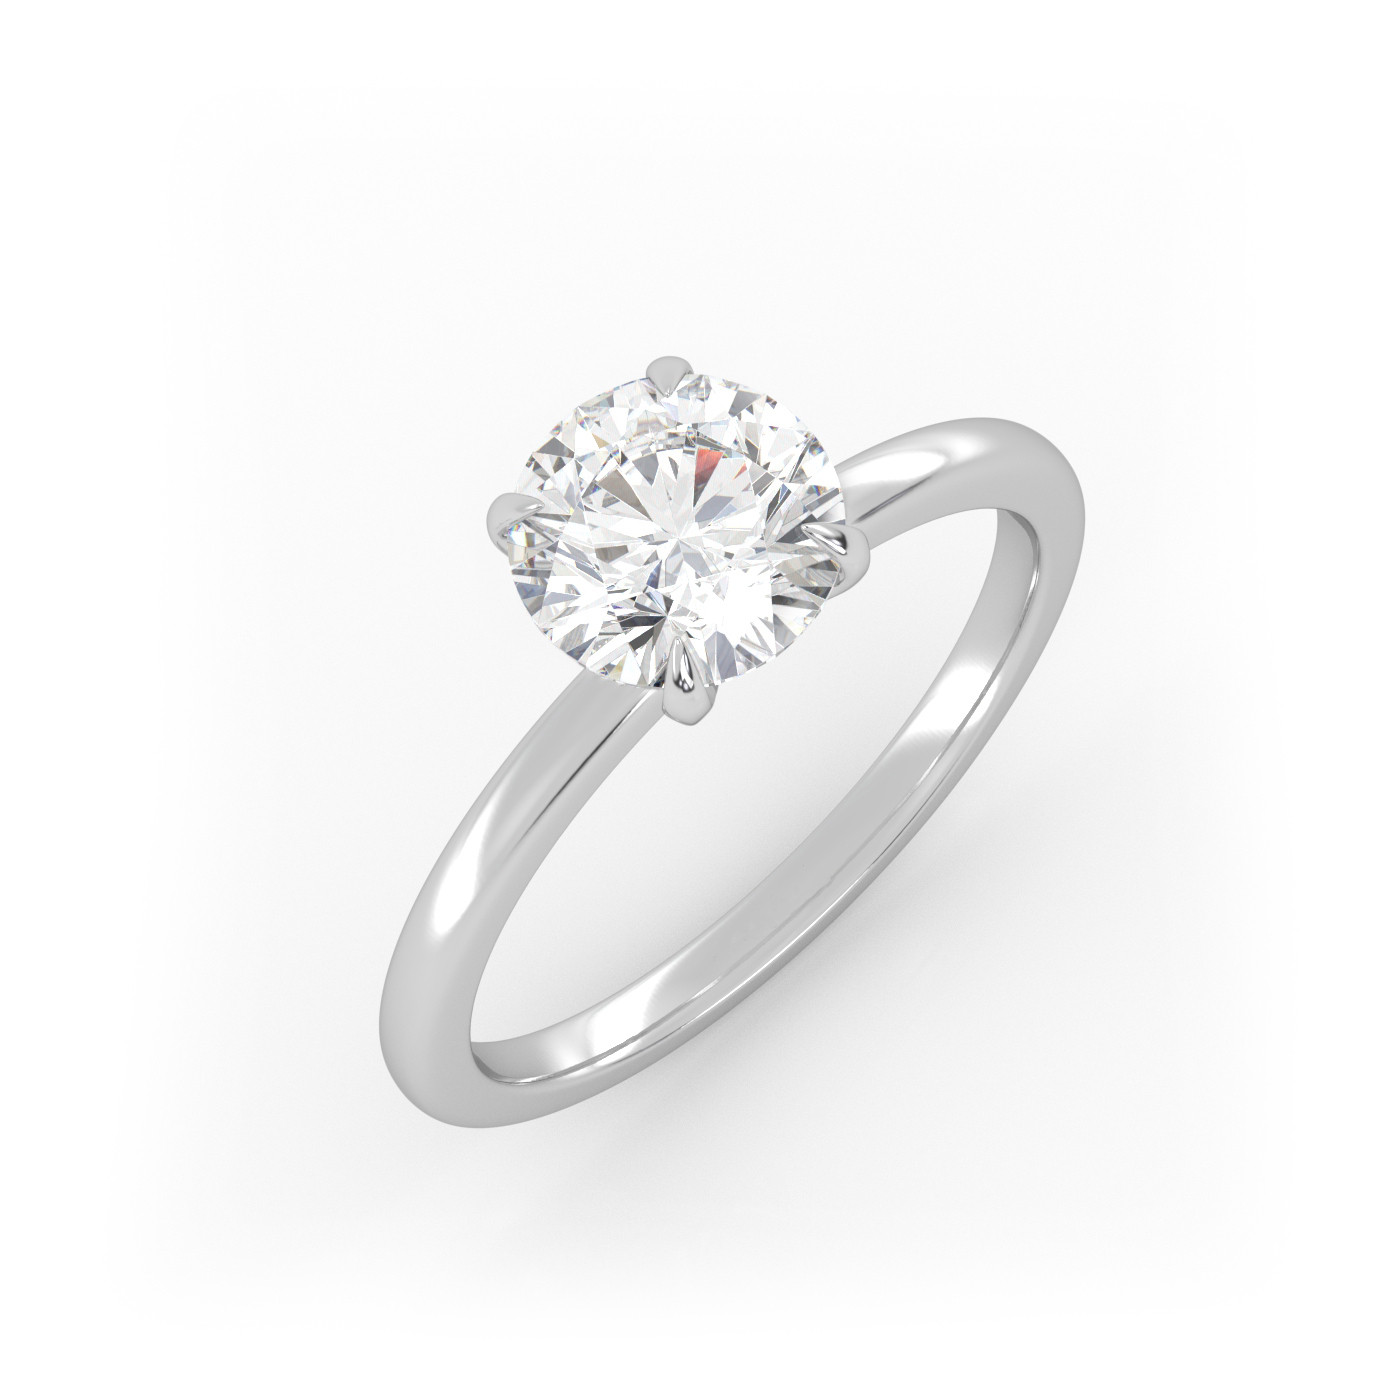 18K WHITE GOLD Round Diamond Cut Solitaire Engagement Ring